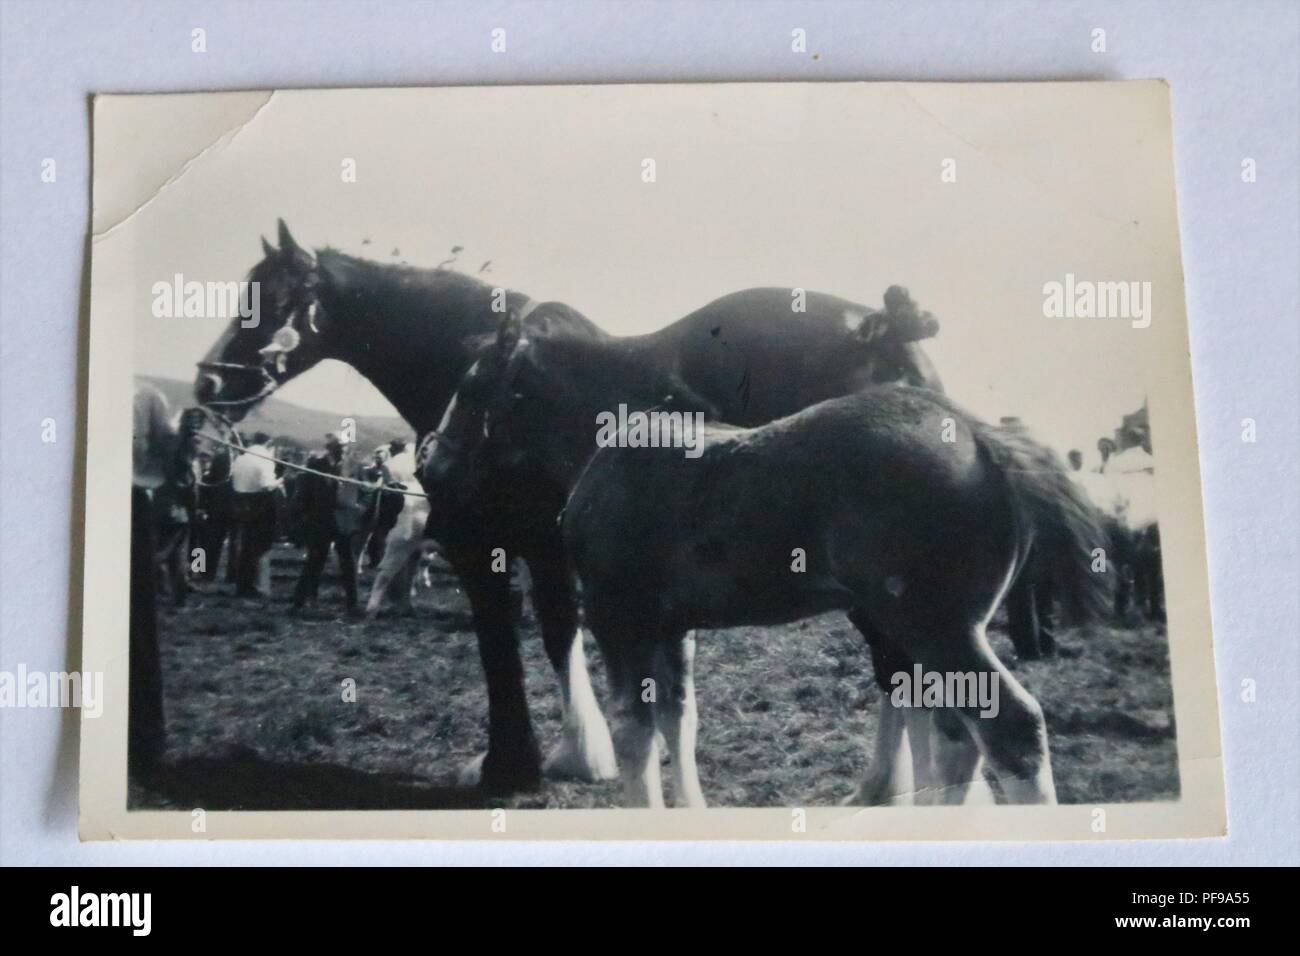 Social History - Black and white old photograph showing horses - possibly county show - 1930s / 1940s Stock Photo